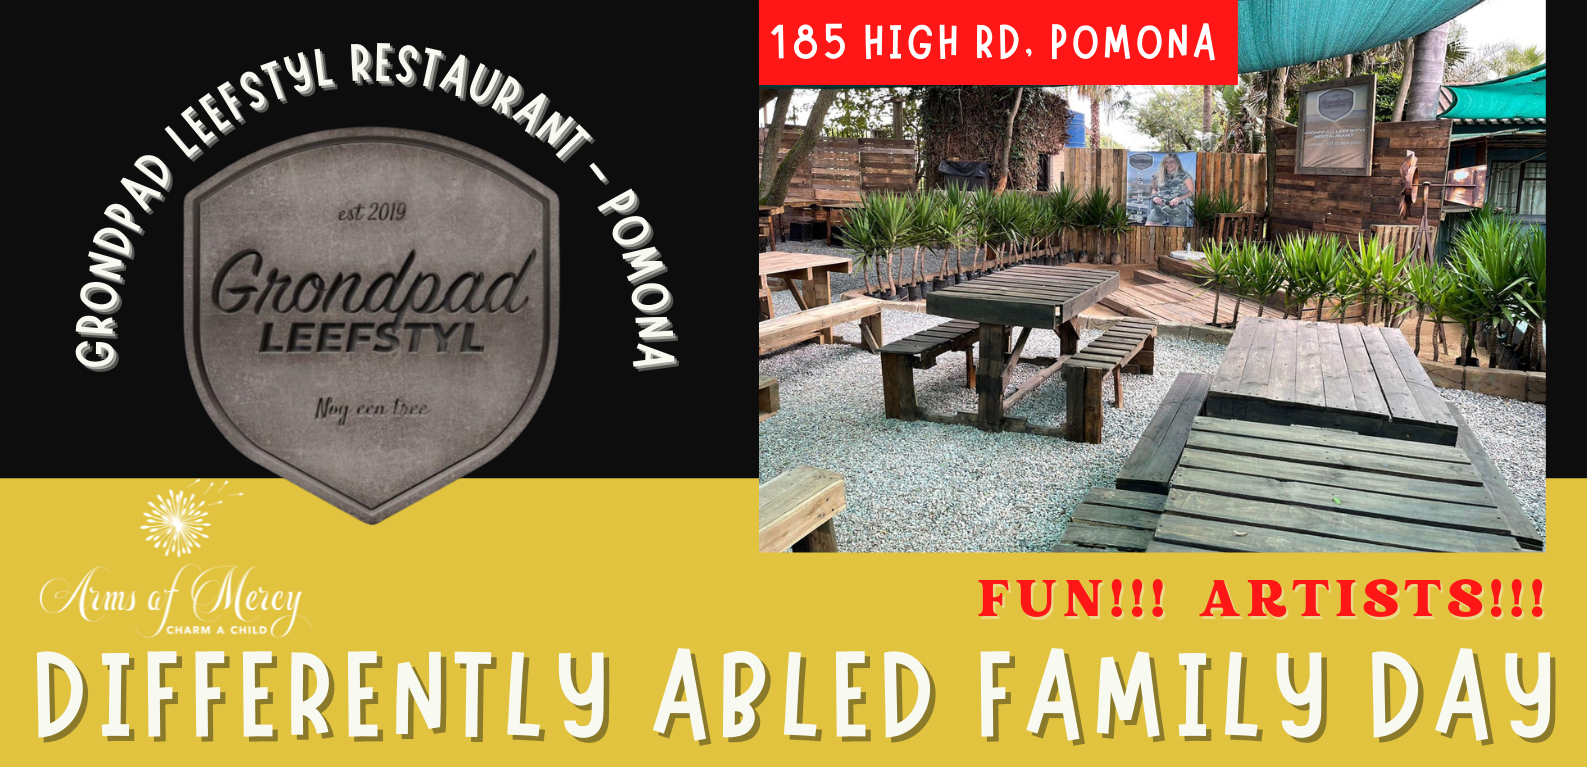 7 May: Differently Abled Family Day @ Grondpad Leefstyl Restaurant – Kempton Park